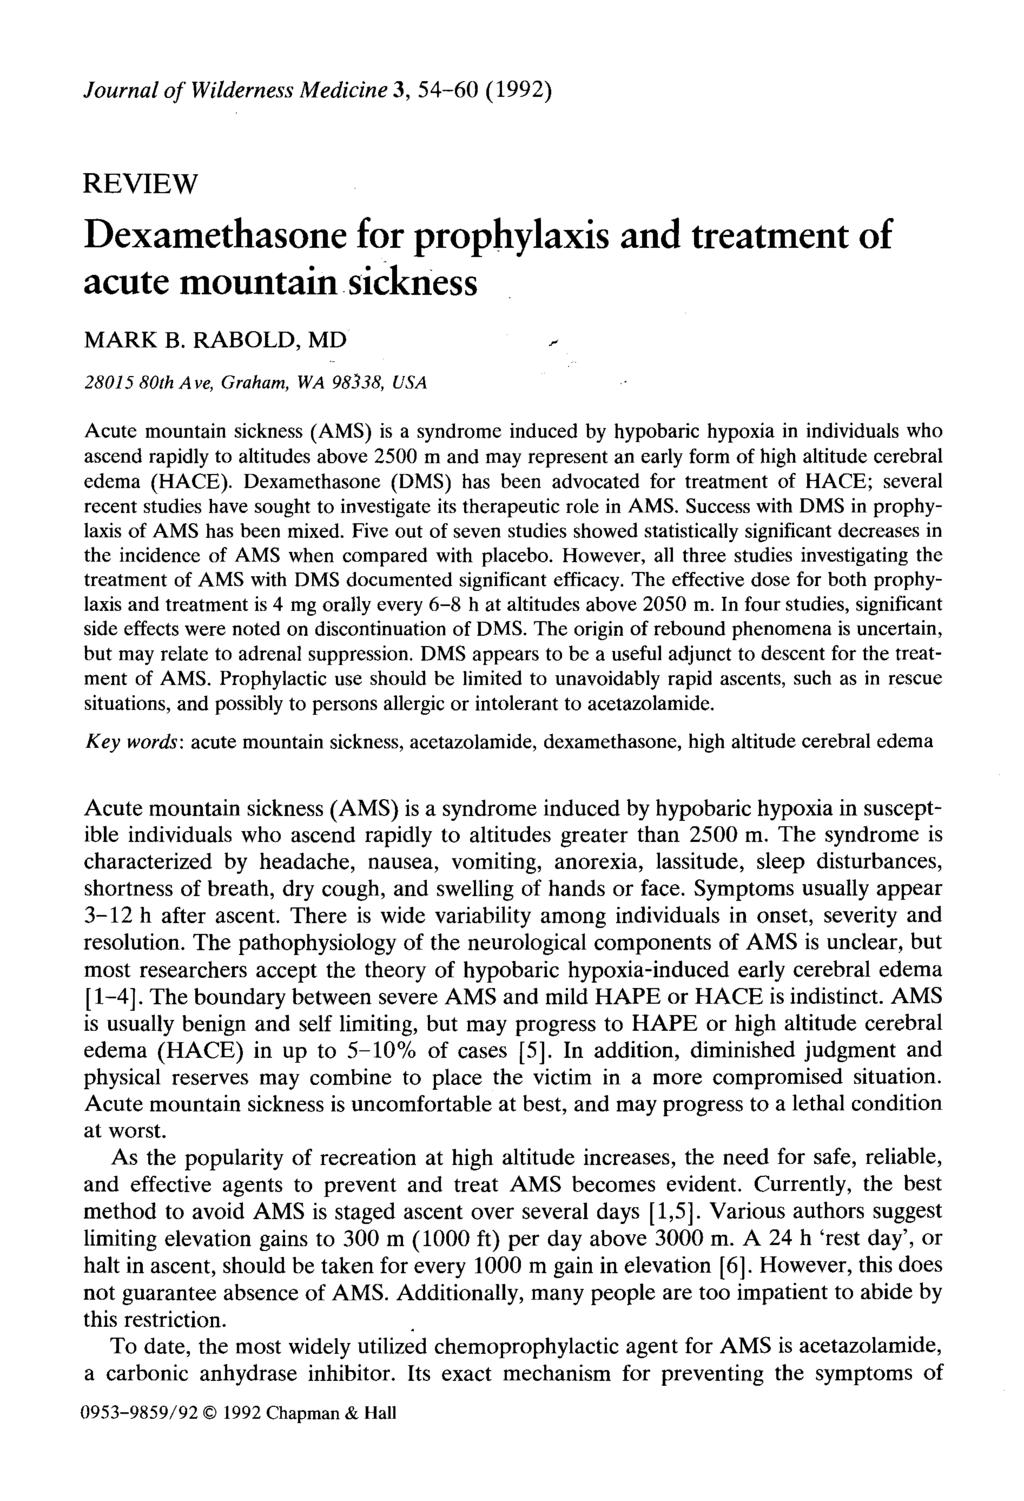 Journal of Wilderness Medicine 3, 54-60 (1992) REVIEW Dexamethasone for prophylaxis and treatment of acute mountain.sickness MARK B.